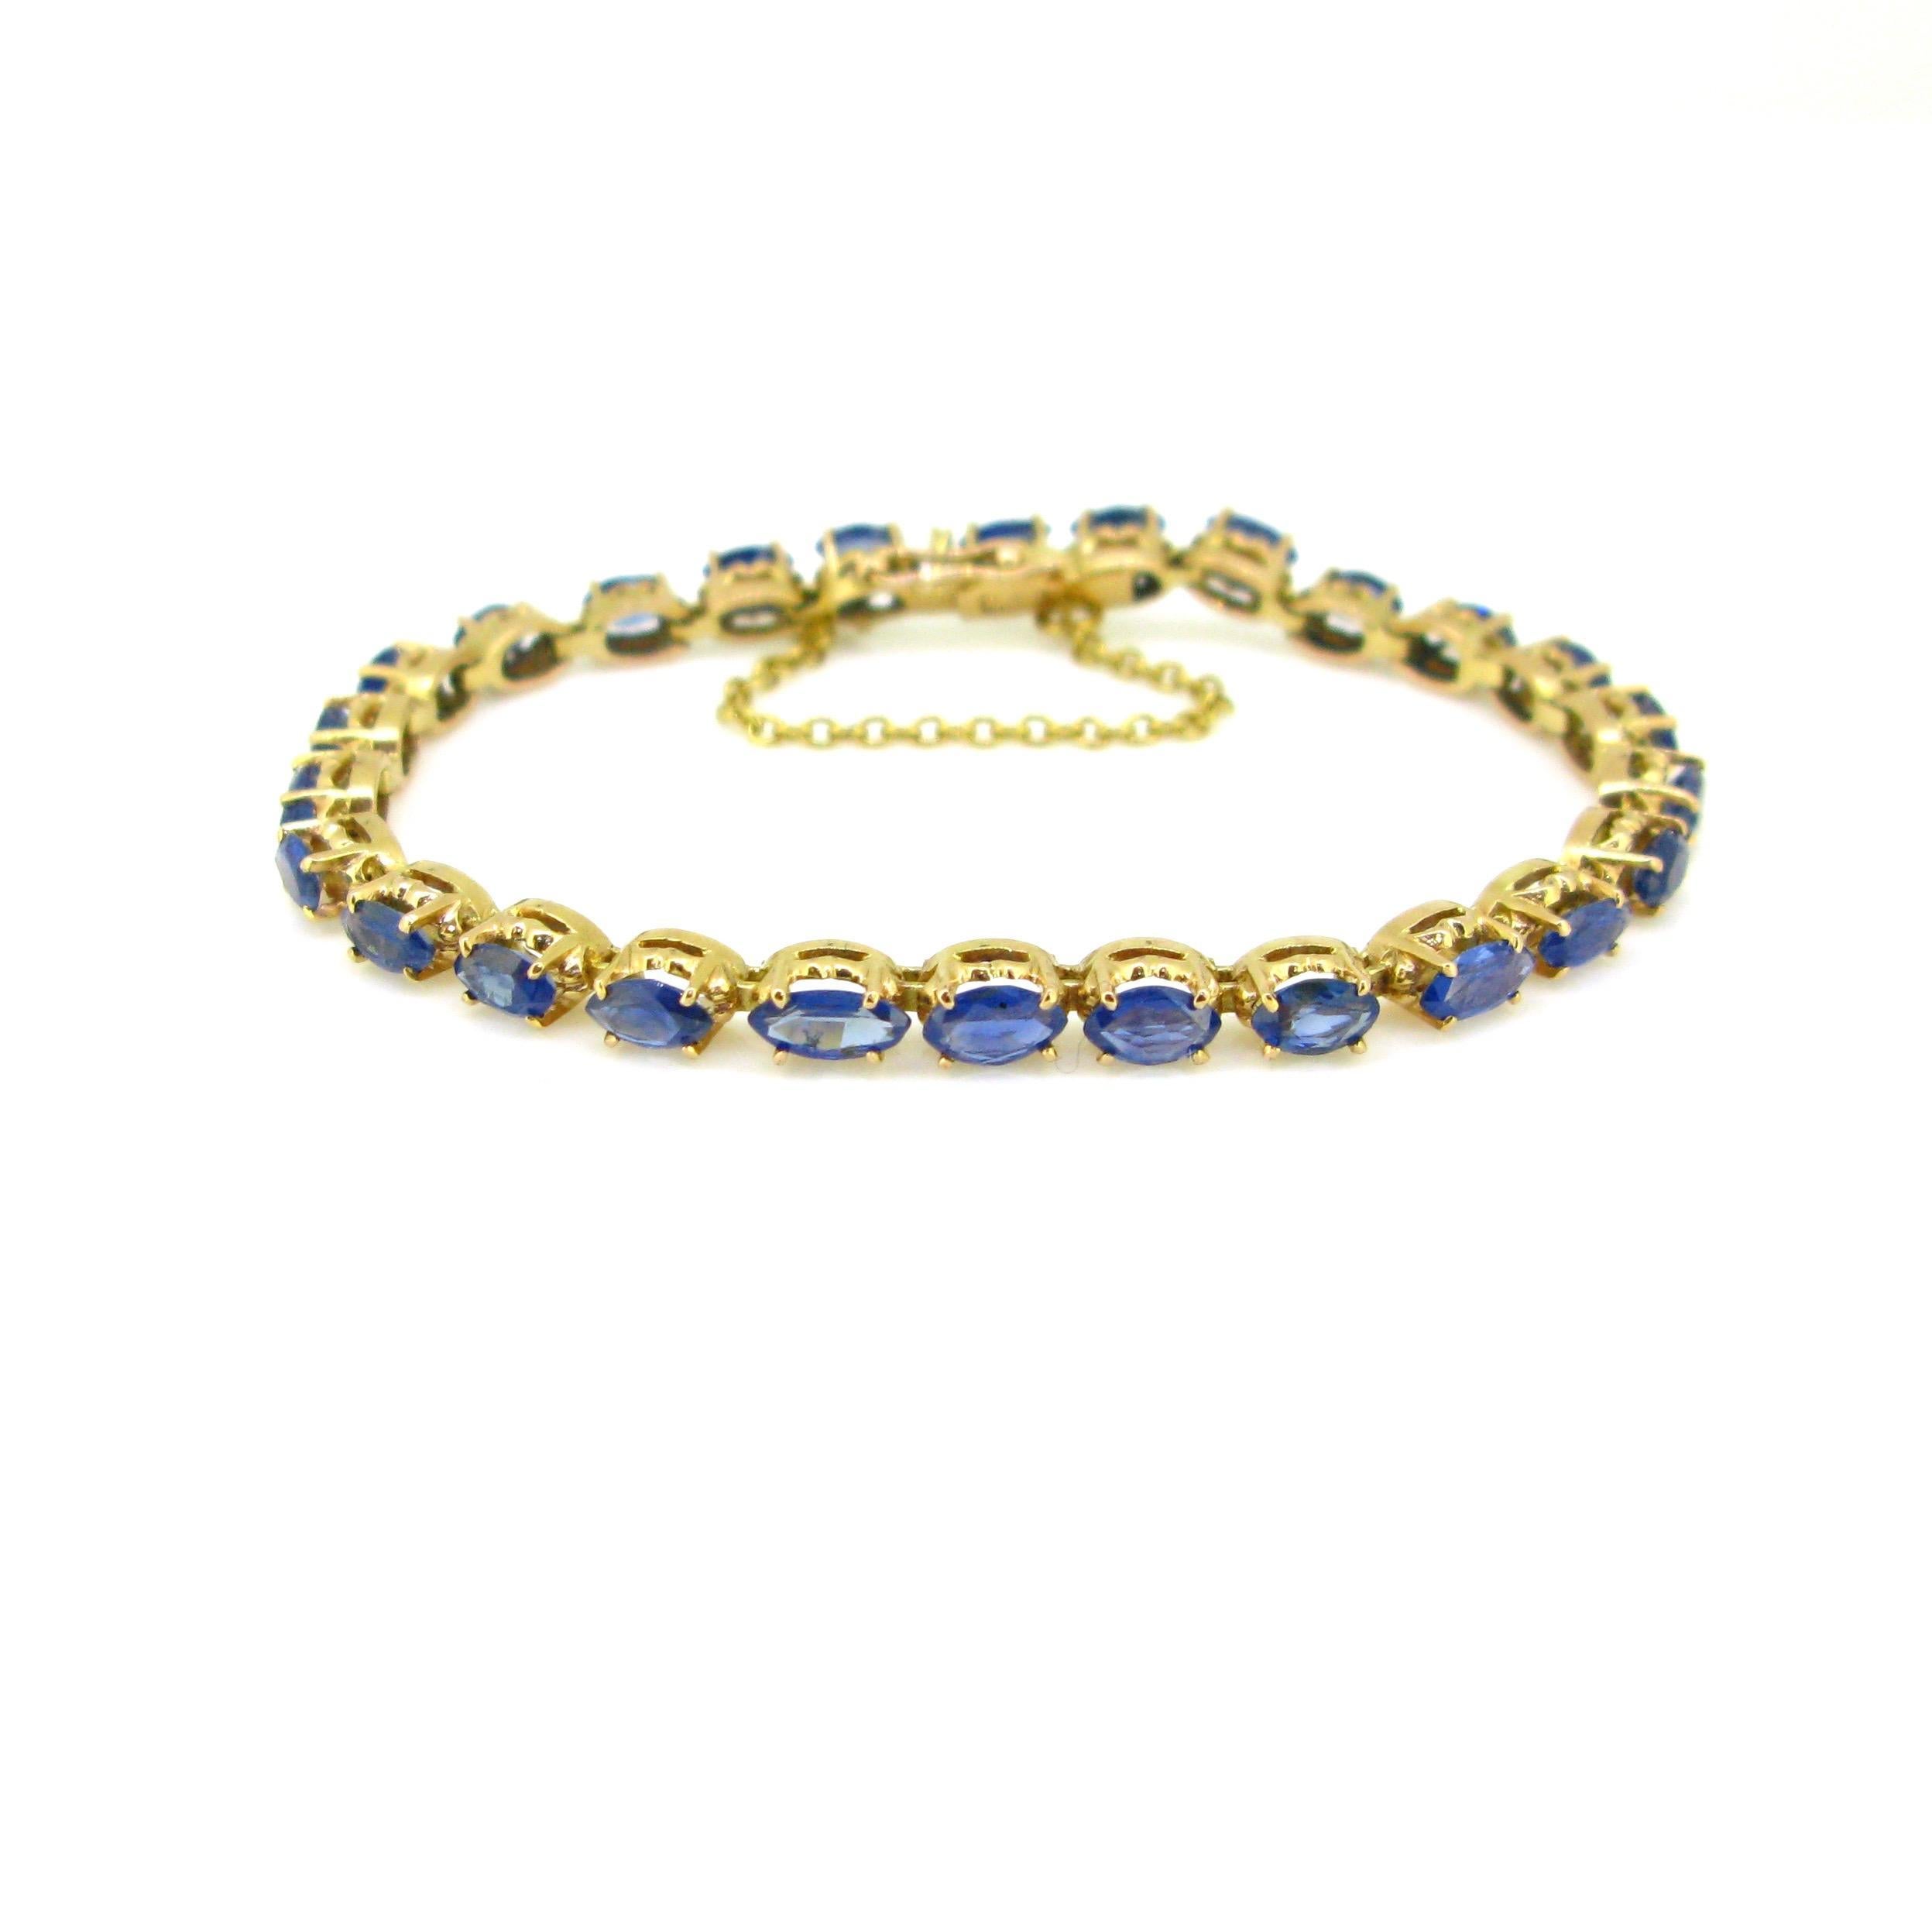 Marquise Cut Modern Navette Cut 4 Carat Sapphires Bracelet, 18 Karat Rose and Yellow Gold For Sale